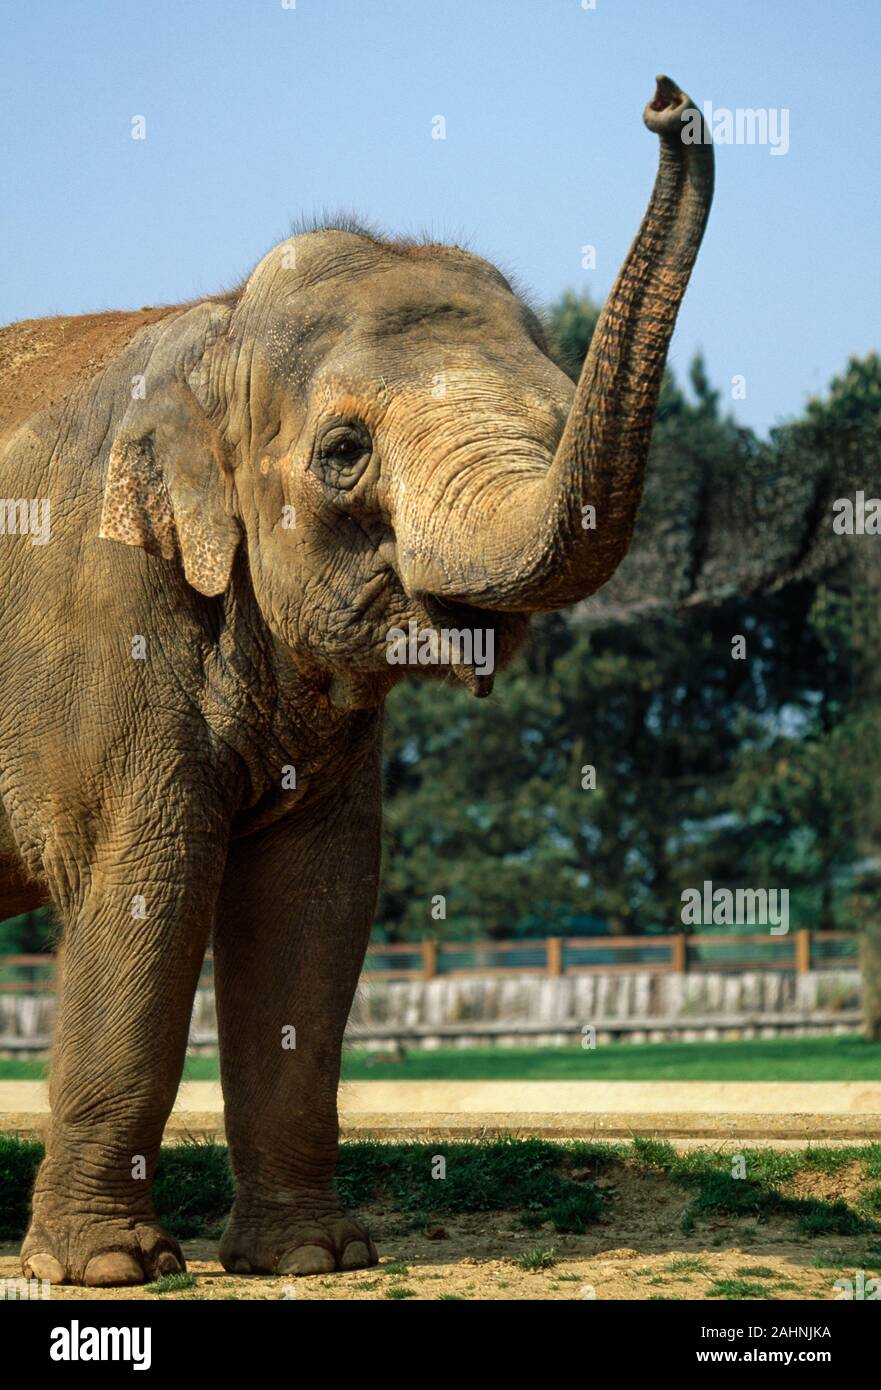 ASIAN ELEPHANT  female, close-up (Elephas maximus),  showing species-specific trunk tip  & small ears  Captive animal, waving aloft a raised trunk. Stock Photo